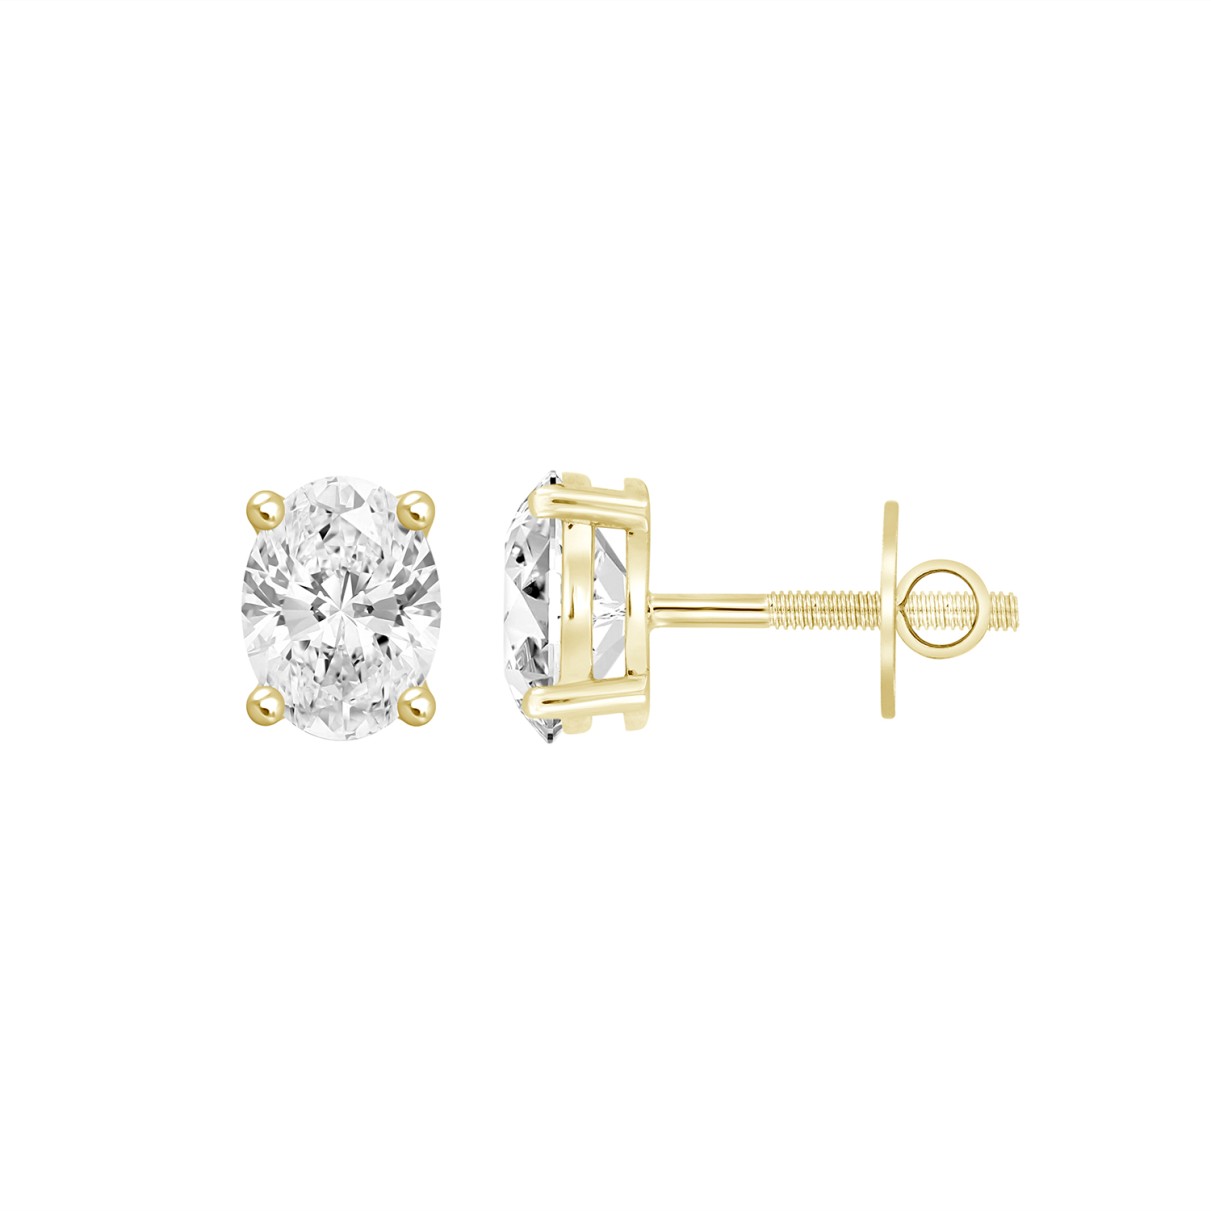 LADIES SOLITAIRE EARRINGS 1/2CT OVAL DIAMOND 14K YELLOW GOLD (CENTER STONE OVAL DIAMOND 1/4CT )